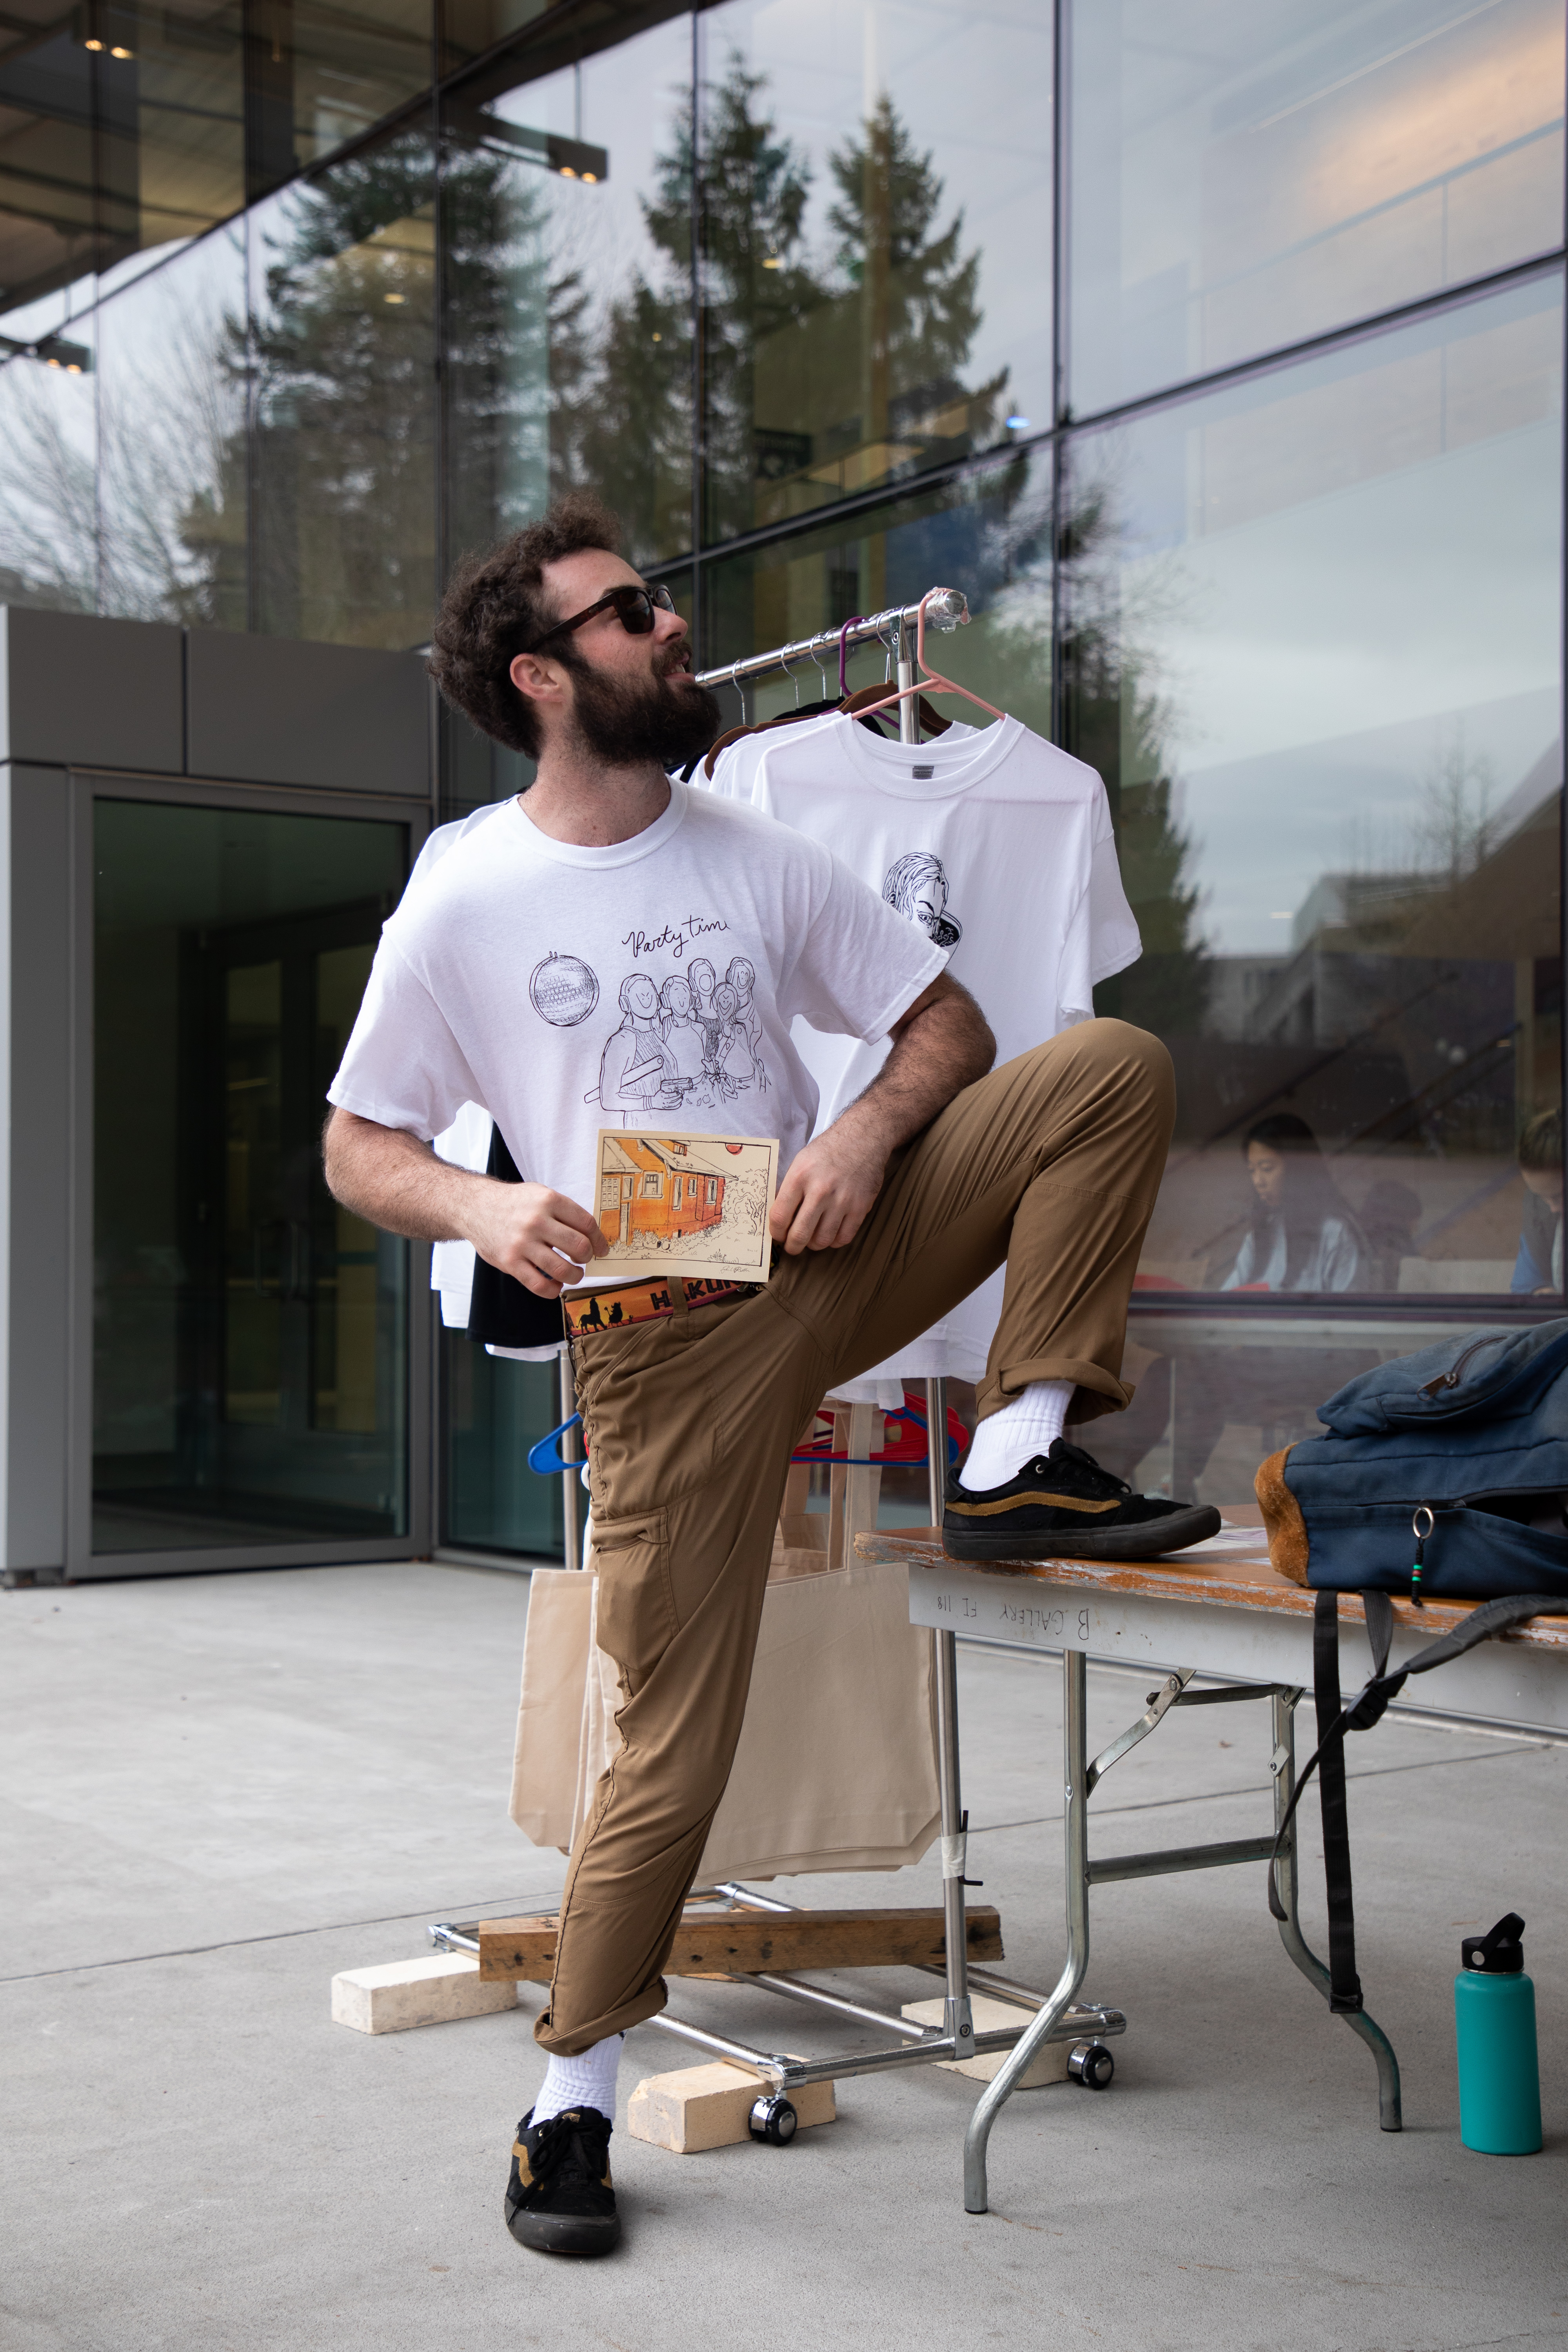 A person wearing sunglasses and a screenprinted shirt, standing next to an outdoor display table with one foot on the table, proudly holding a small drawing and looking up and to the side with a smile. A rack of screenprinted t-shirts and tote bags hangs behind the person, next to the table.